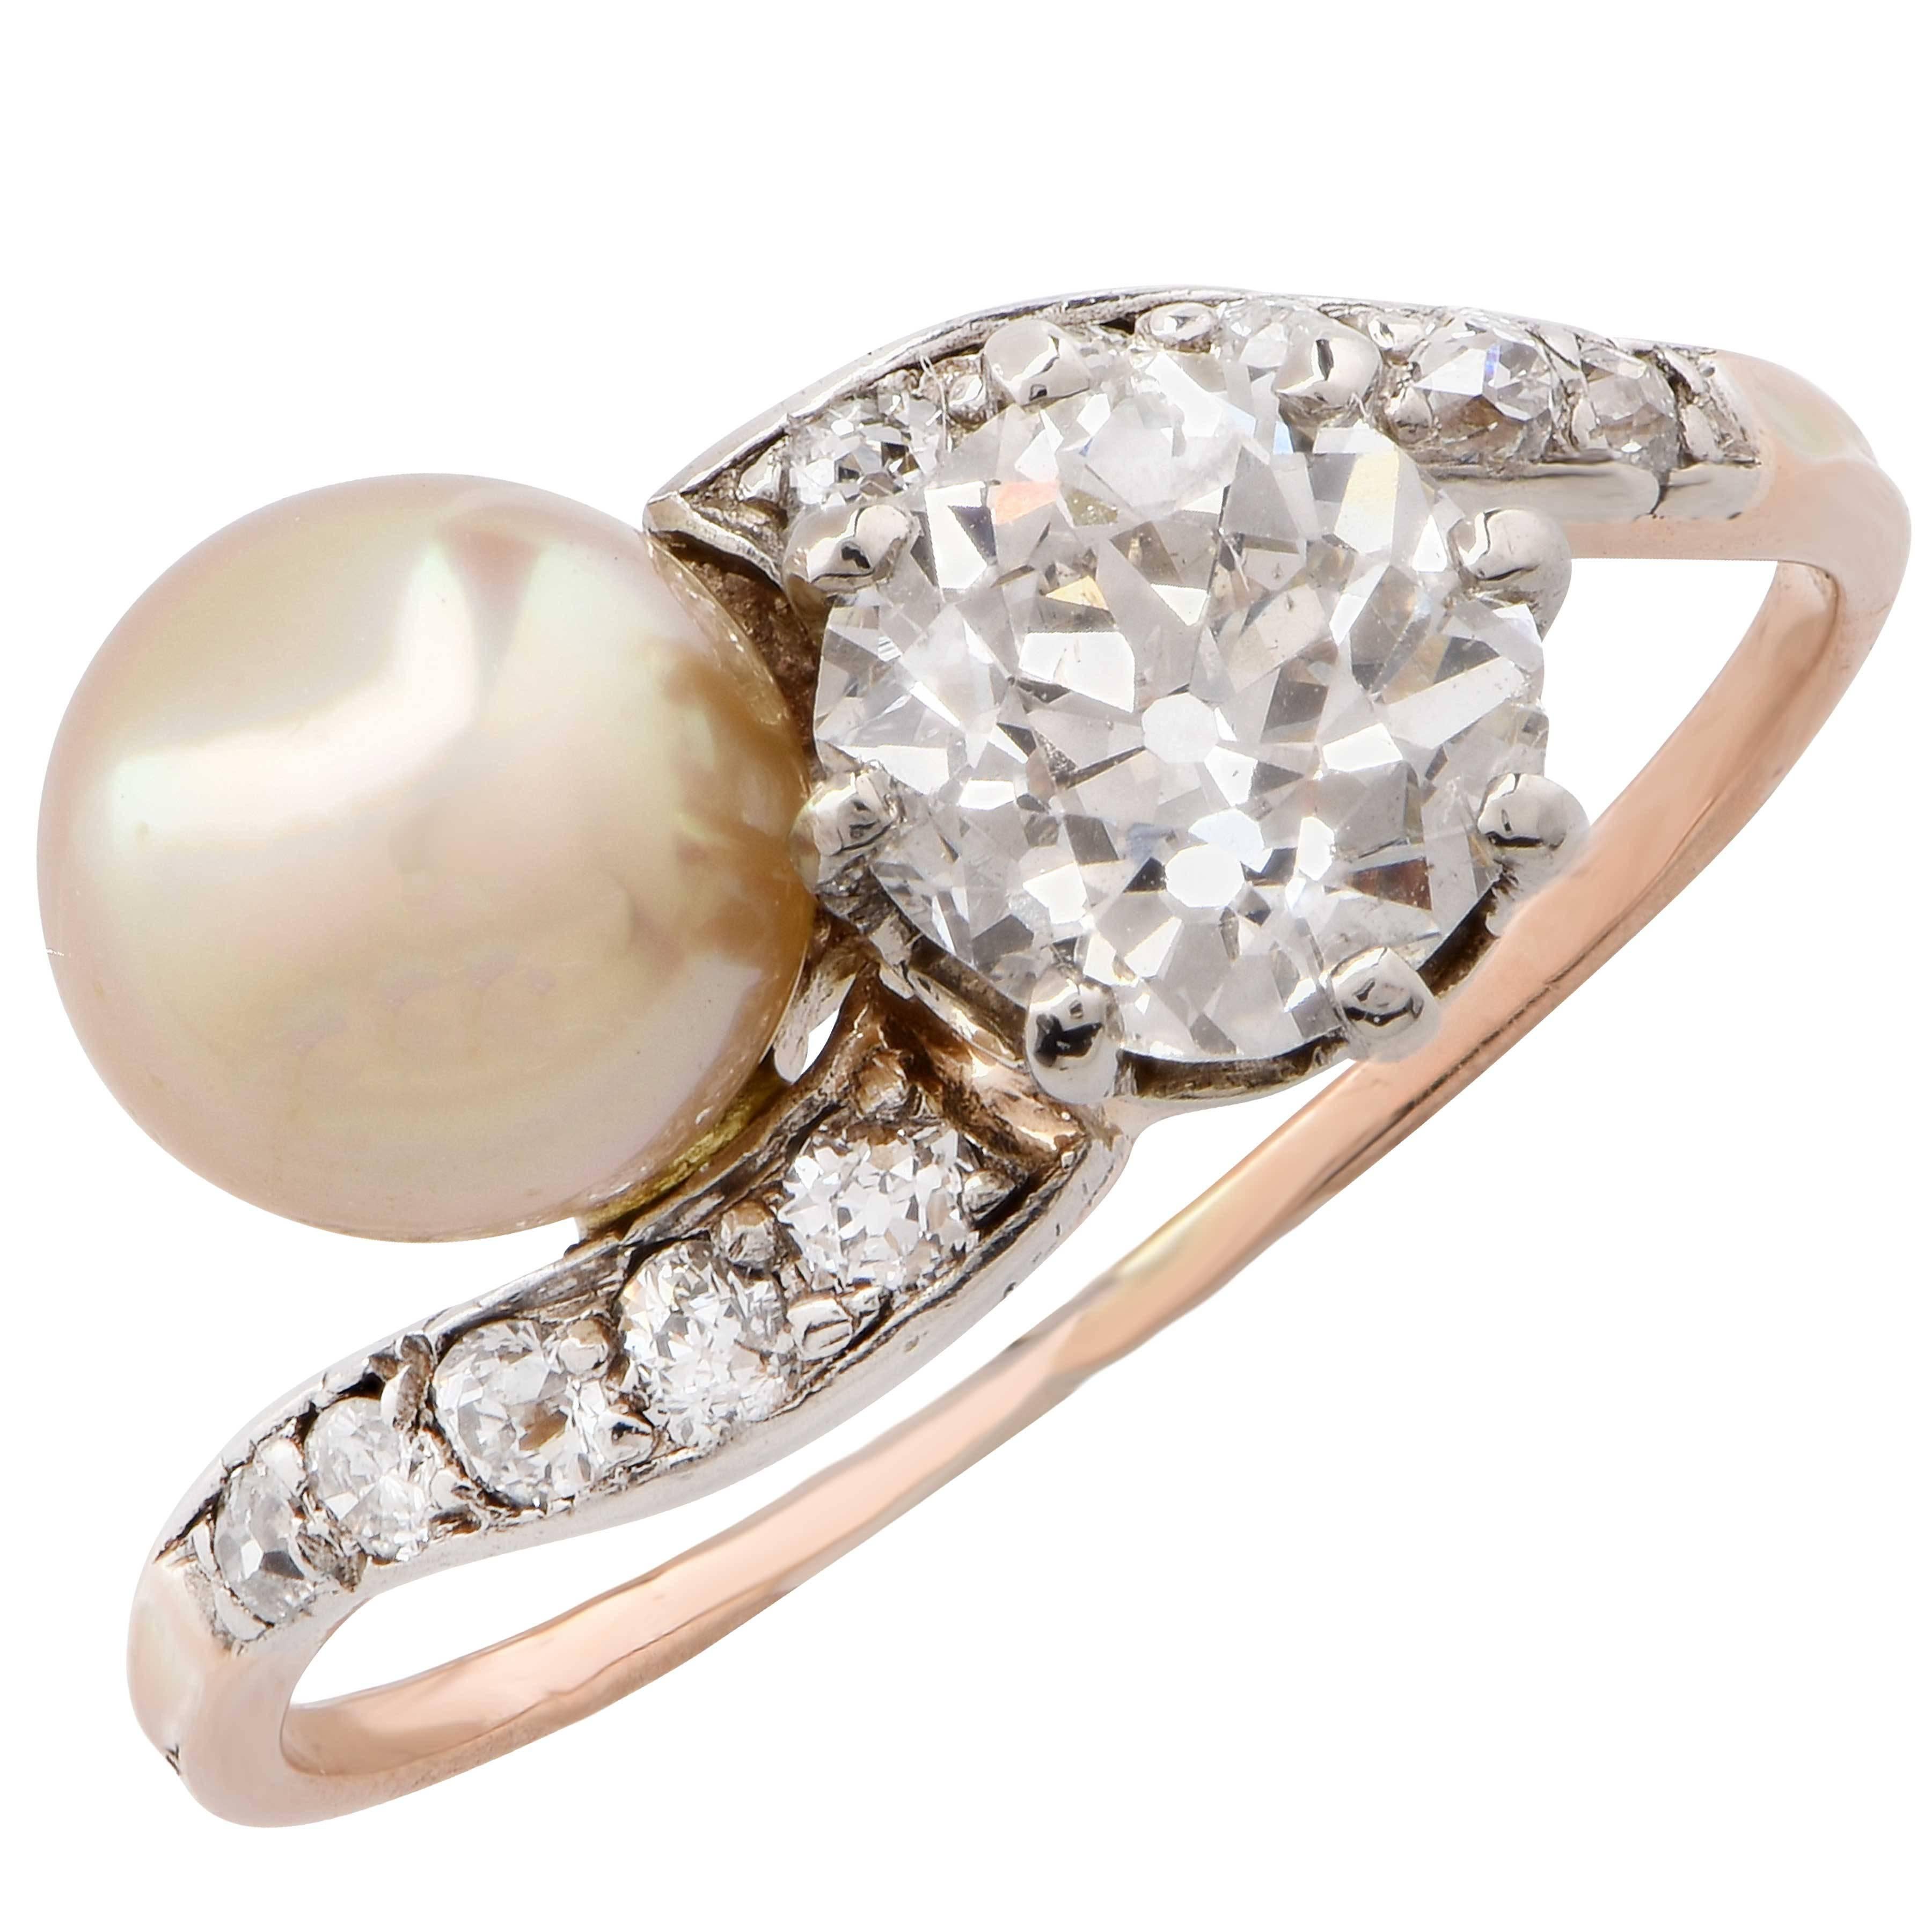 Pearl and diamond crossover ring.
Old Miner cut diamond weighing 1.00 carats. GIA certified: color I, Clarity SI2. 
Size 6 3/4. Can be sized.